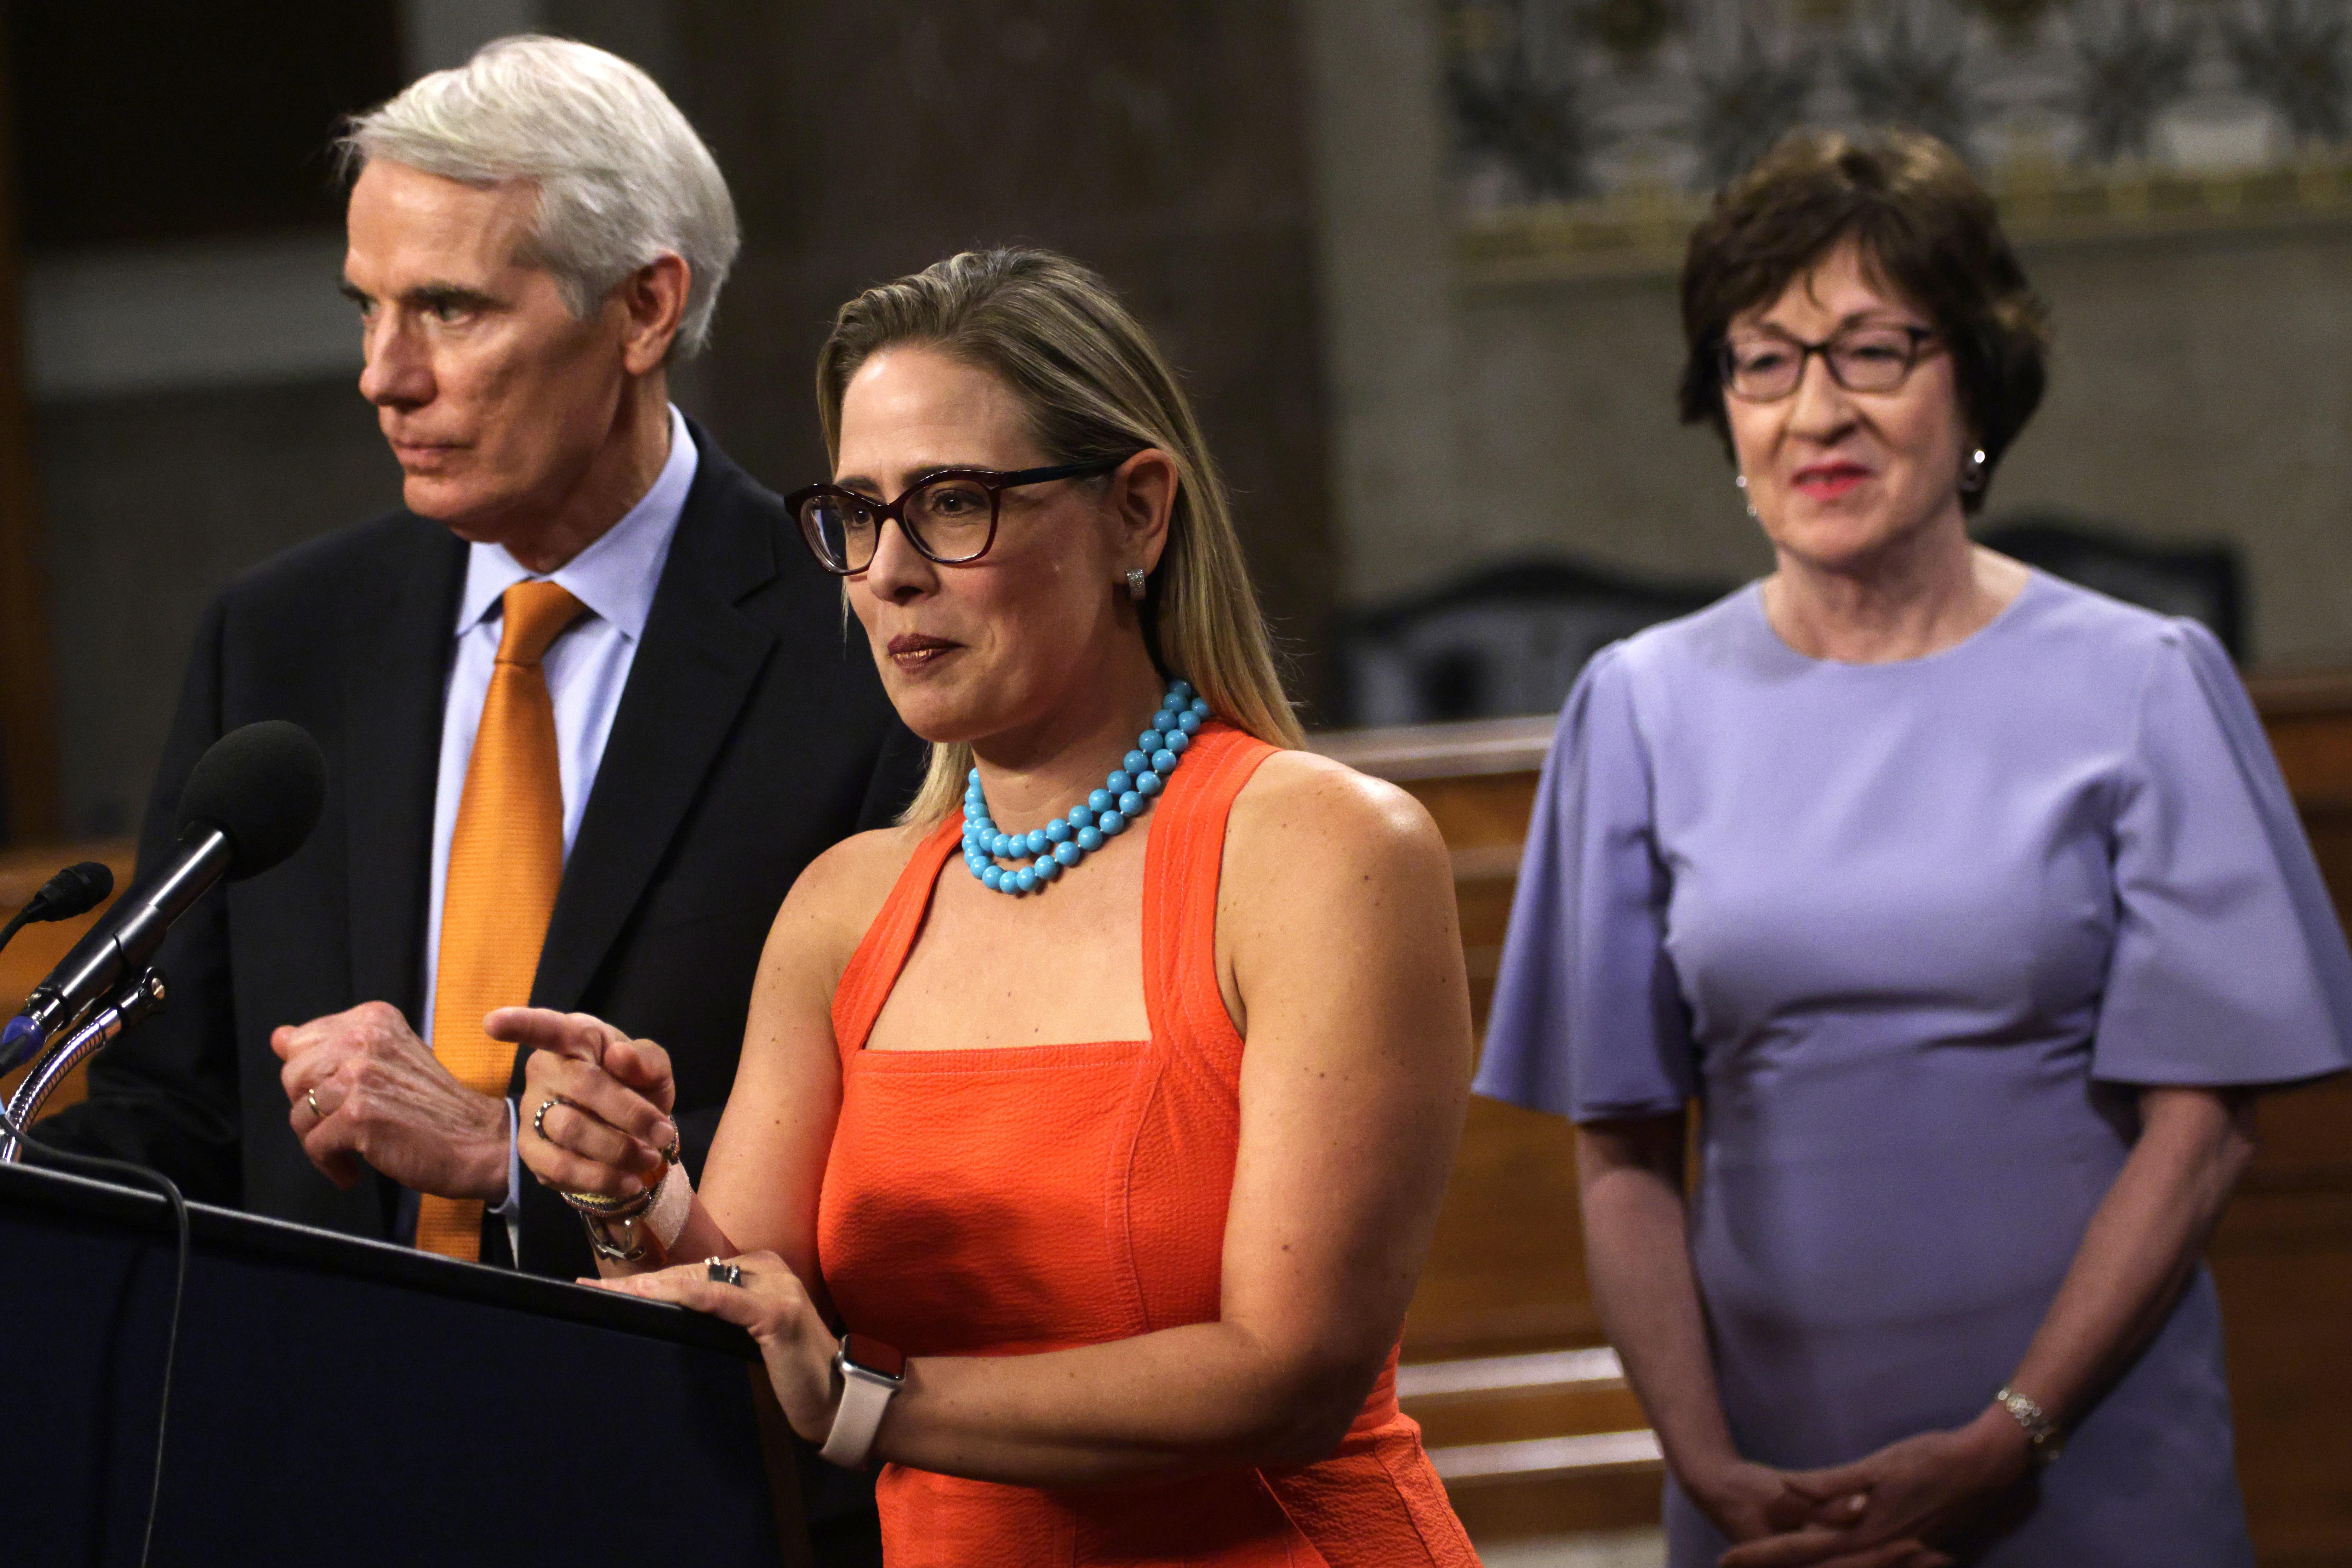 WASHINGTON, DC - JULY 28:  U.S. Sen. Rob Portman (R-OH) (L) and Sen. Kyrsten Sinema (D-AZ) (2nd L) answer questions from members of the press as Sen. Susan Collins (R-ME) looks on during a news conference after a procedural vote for the bipartisan infrastructure framework at Dirksen Senate Office Building July 28, 2021 on Capitol Hill in Washington, DC. The Senate has advanced the bipartisan infrastructure framework with the vote of 67-32. (Photo by Alex Wong/Getty Images)